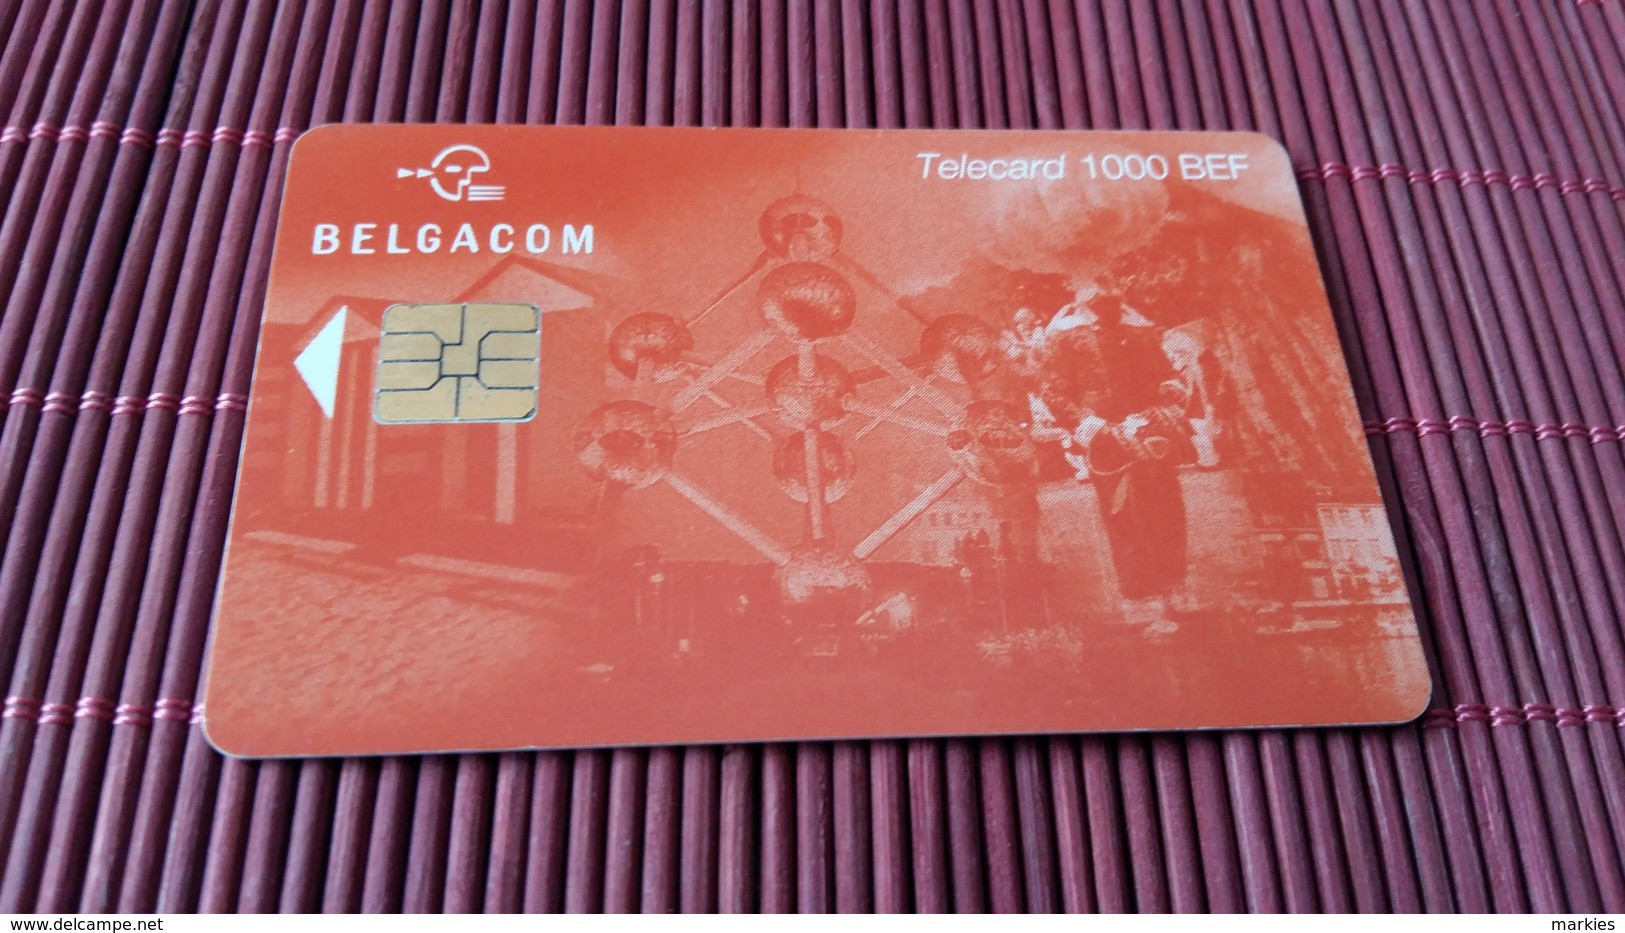 Phonecard Atomium 1000 BEF Used II 31.03.2002 Only 15.000 Ex Made Rare - Con Chip